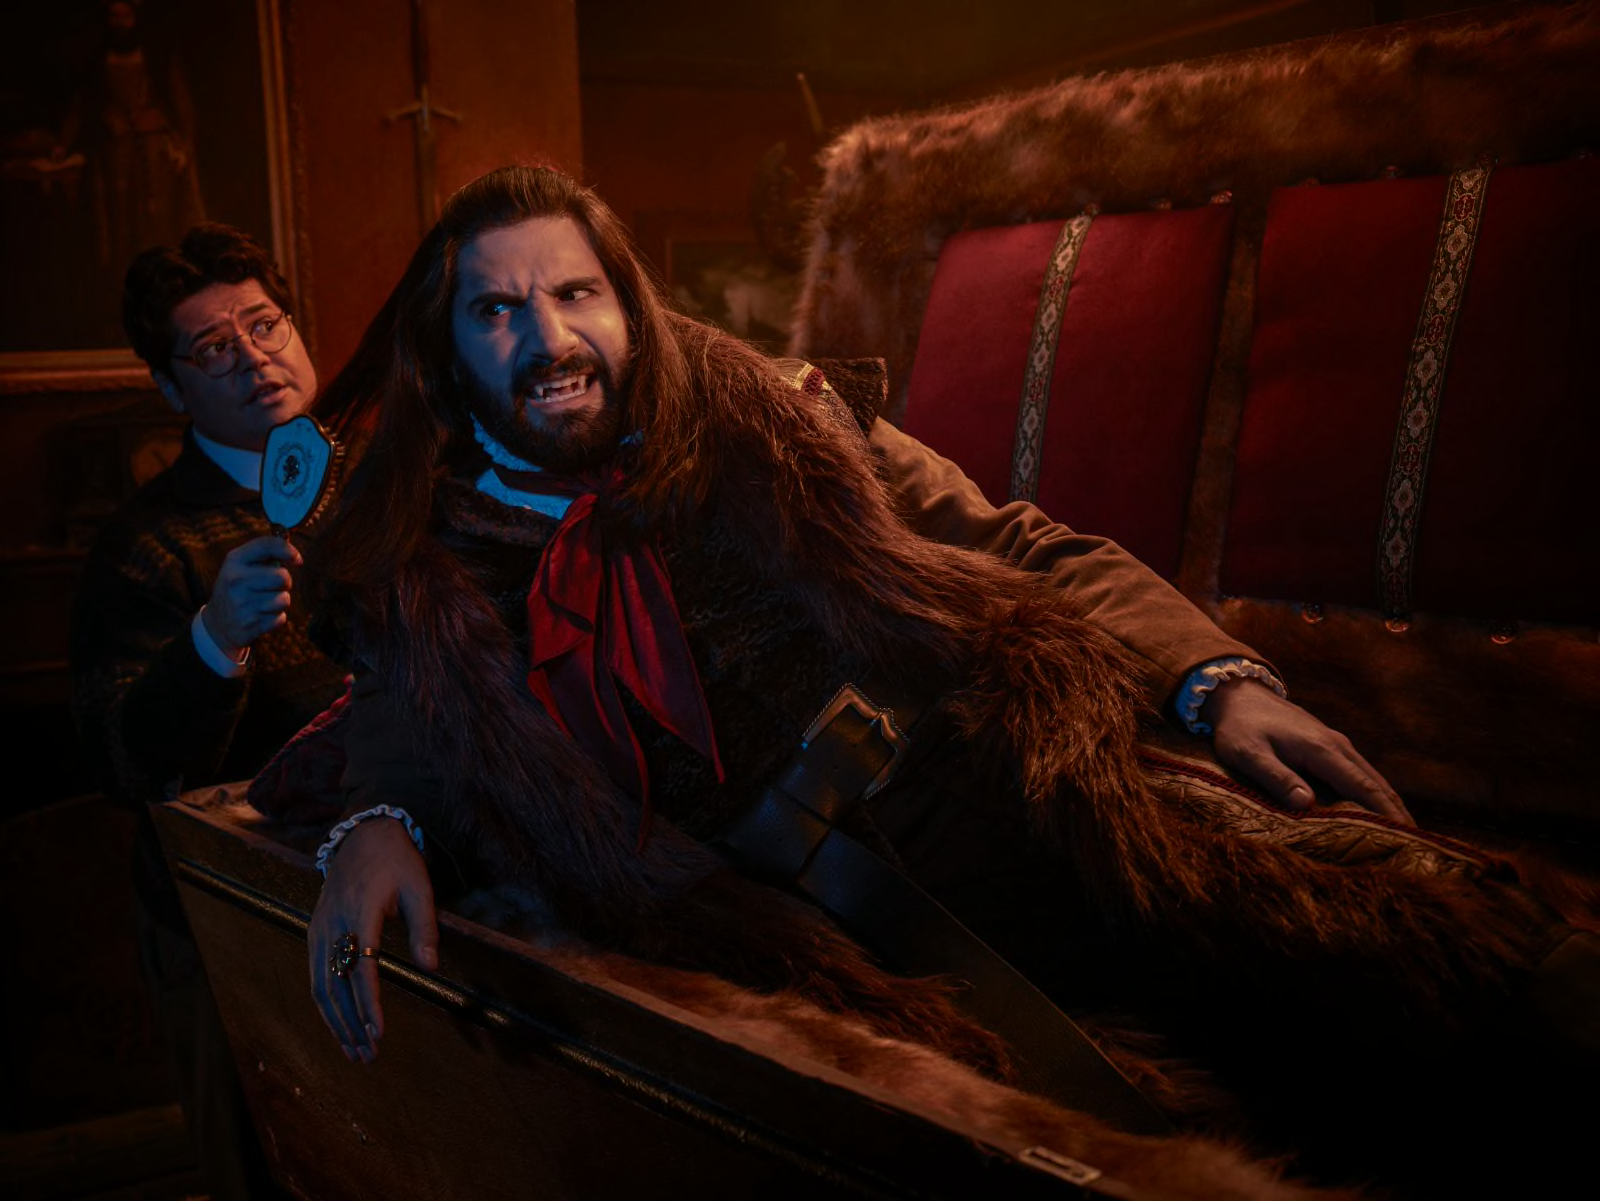 WHAT WE DO IN THE SHADOWS